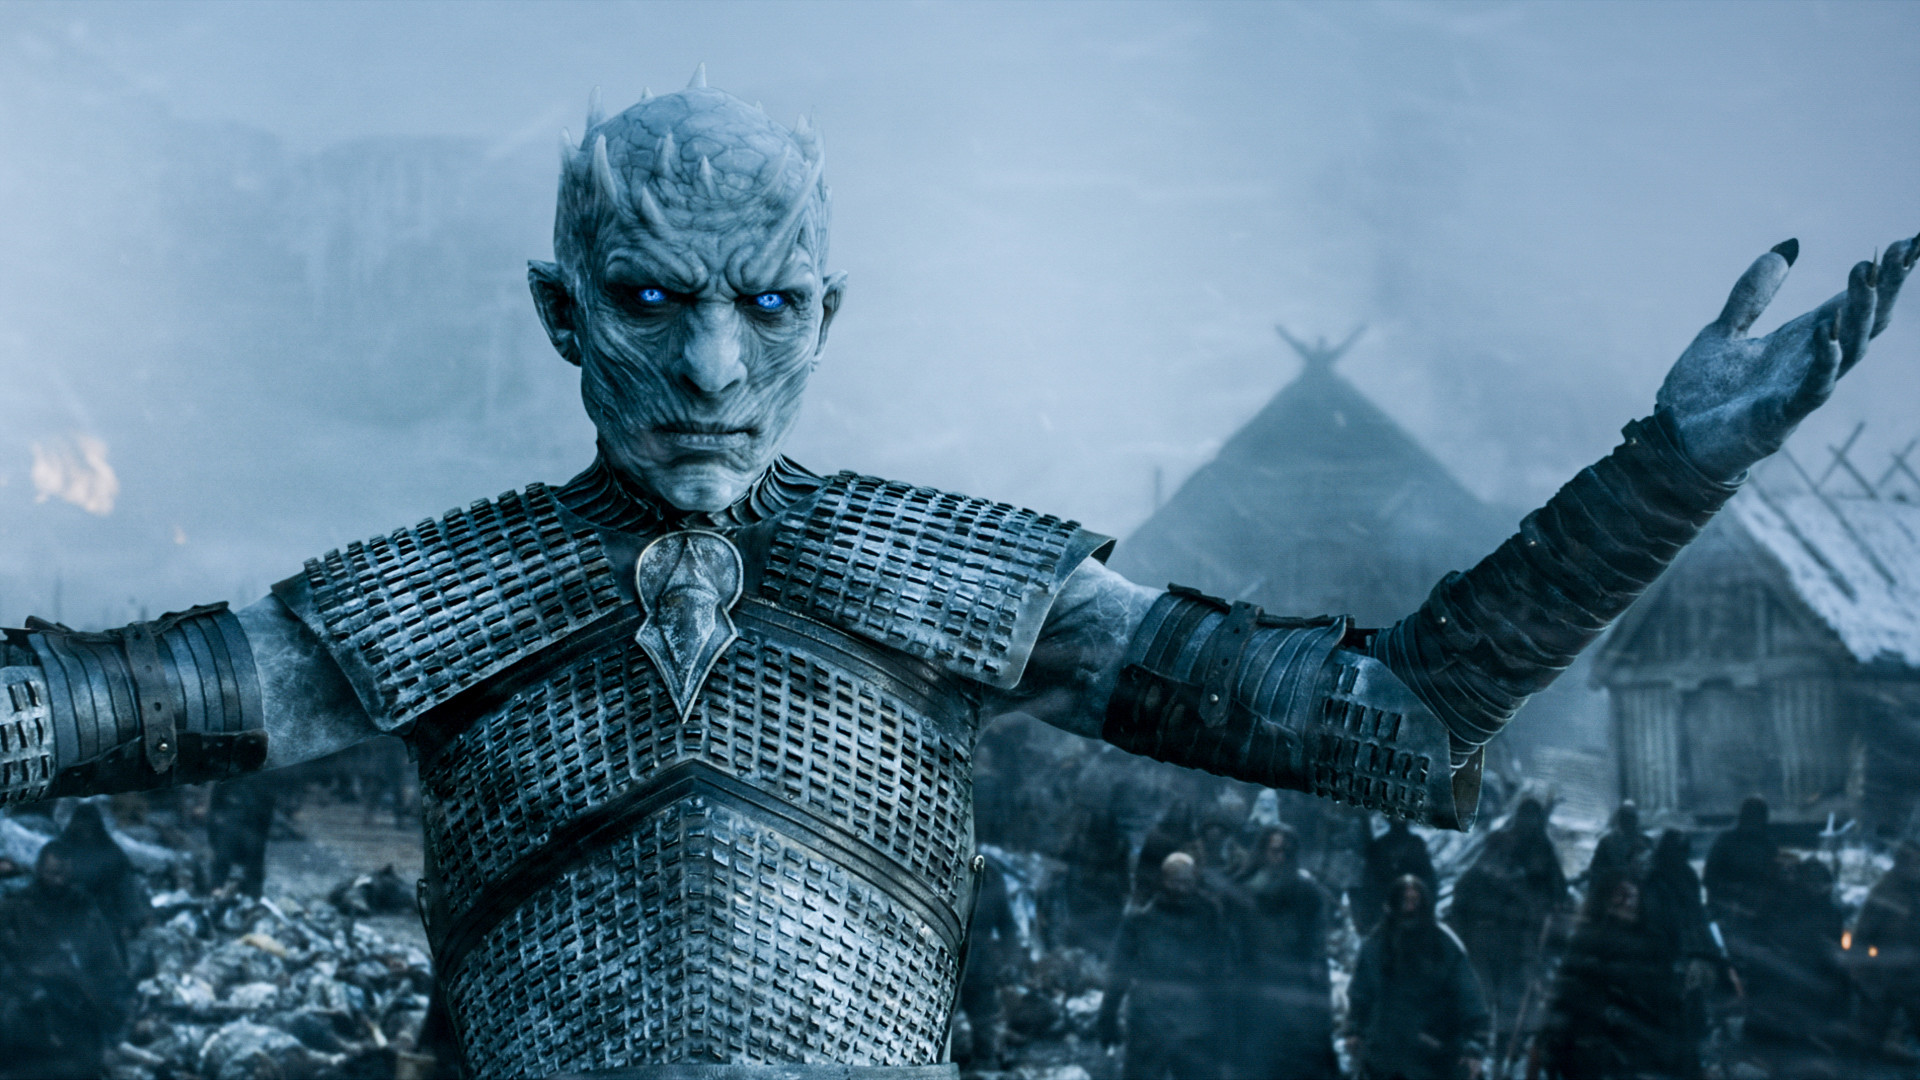 Gallery Rollup Icon The White Walker King Glares on Game of Thrones Season 5, Episode 8